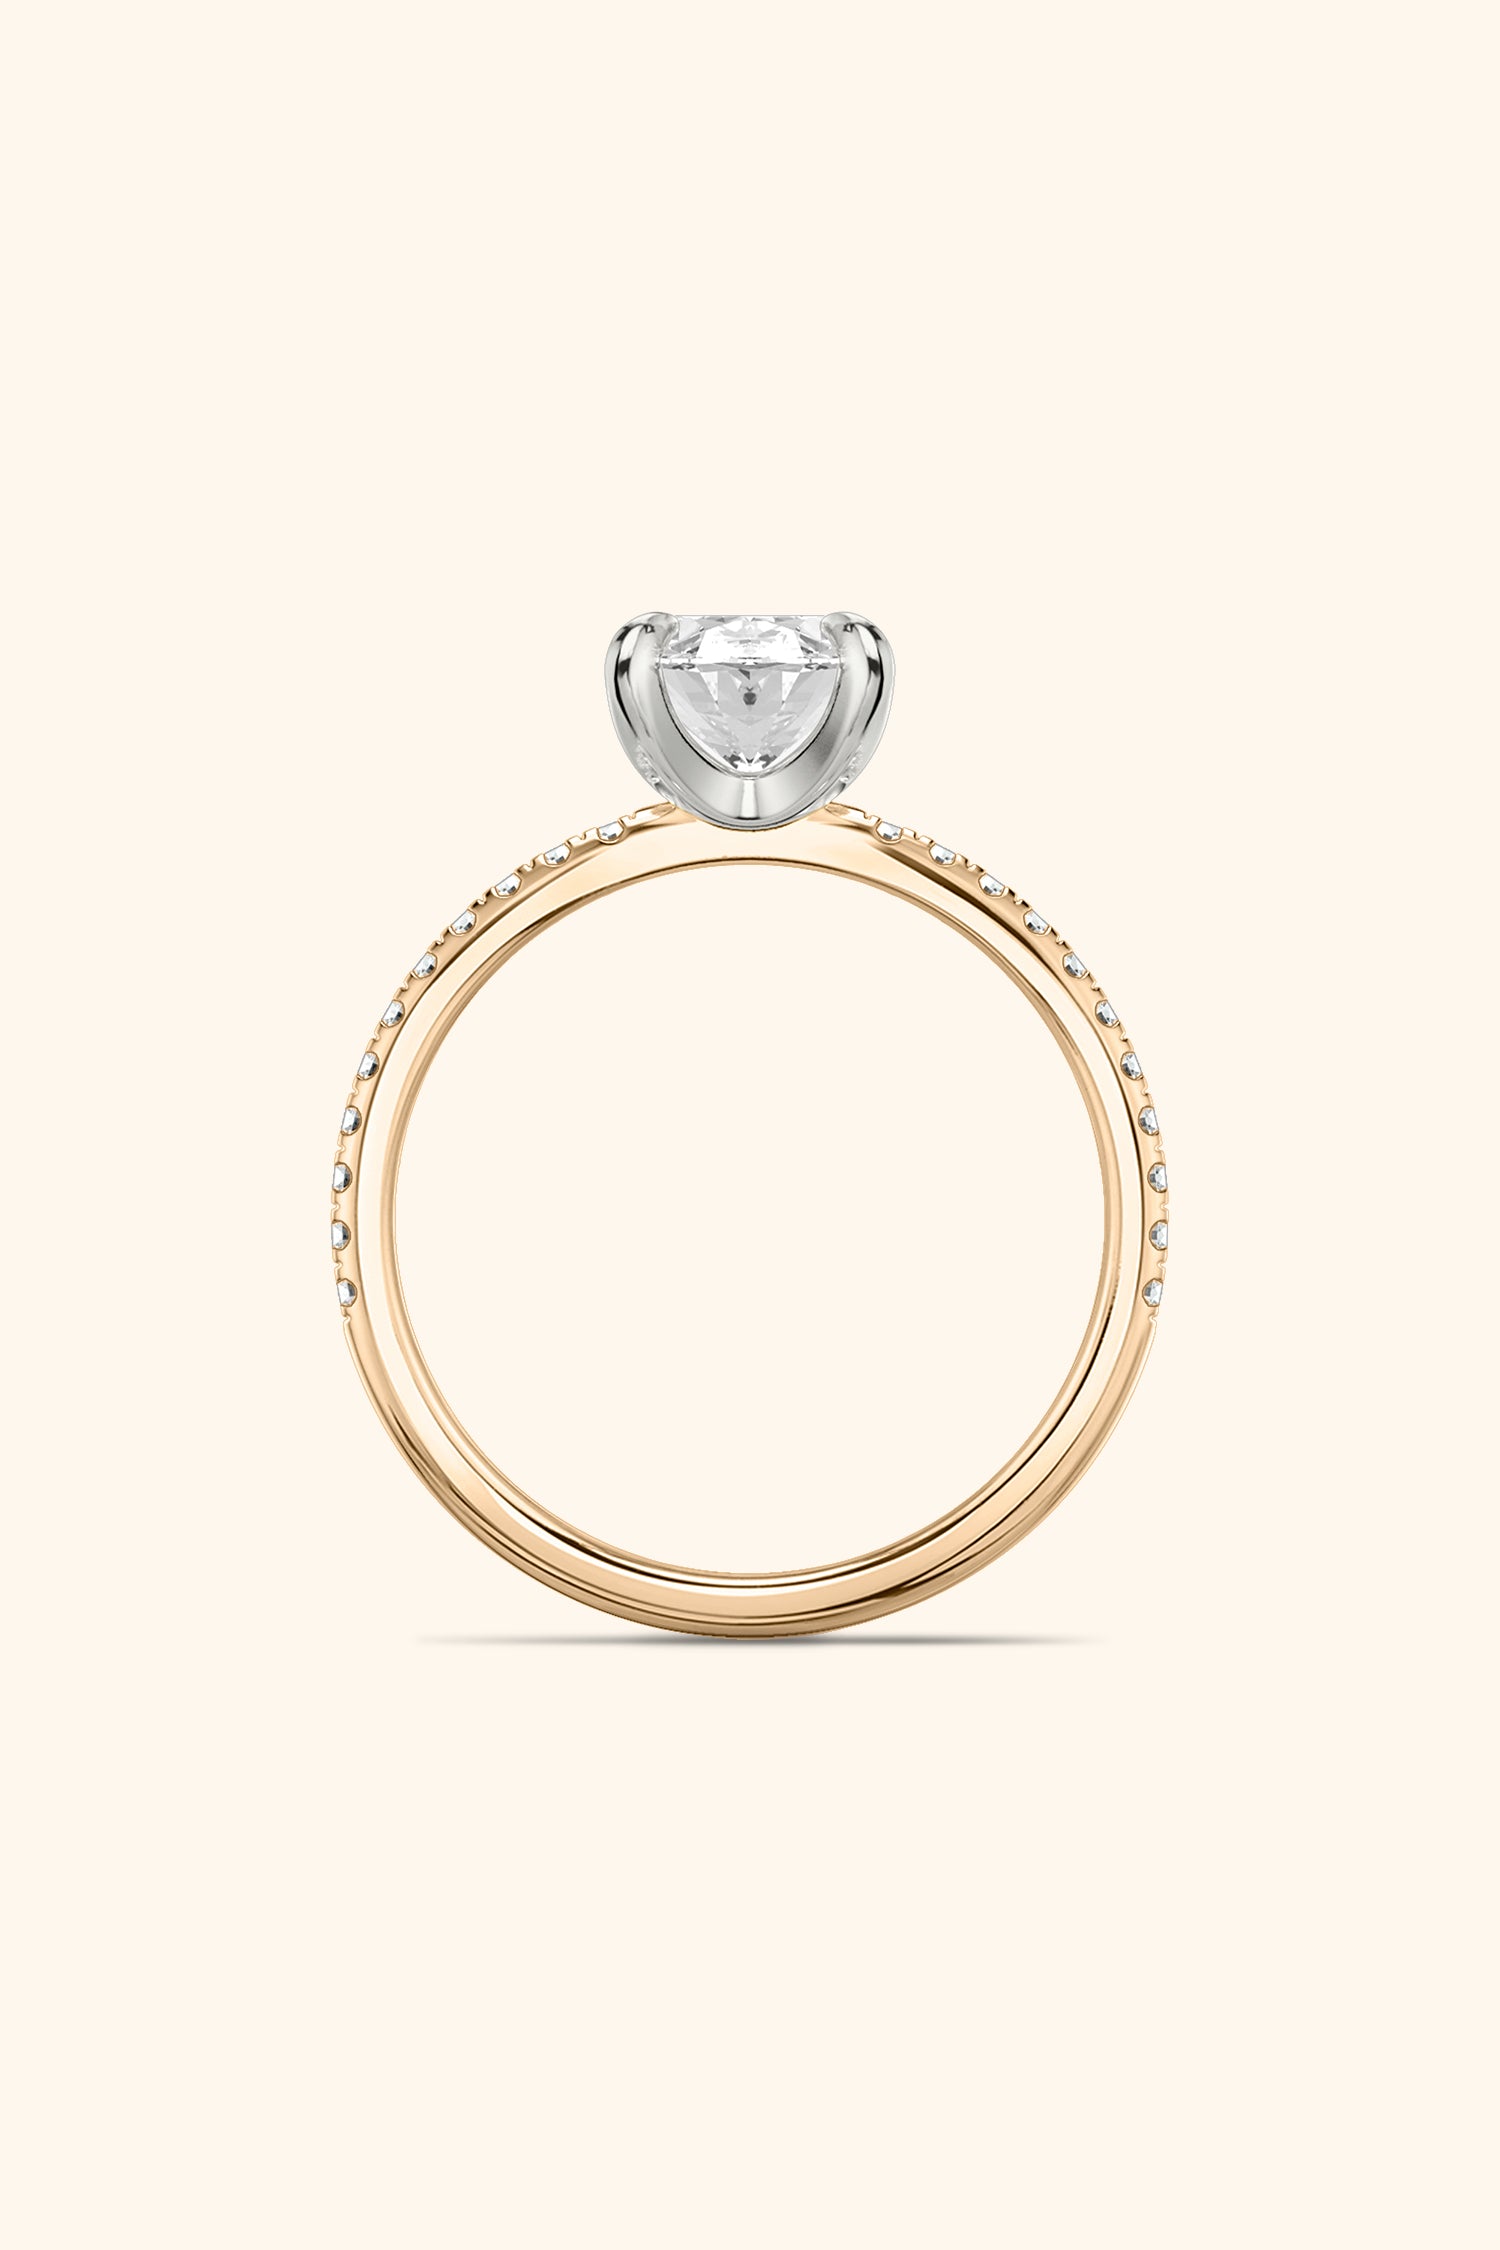 Dual Tone Glance Pavé Ring with 1 Carat Oval Solitaire